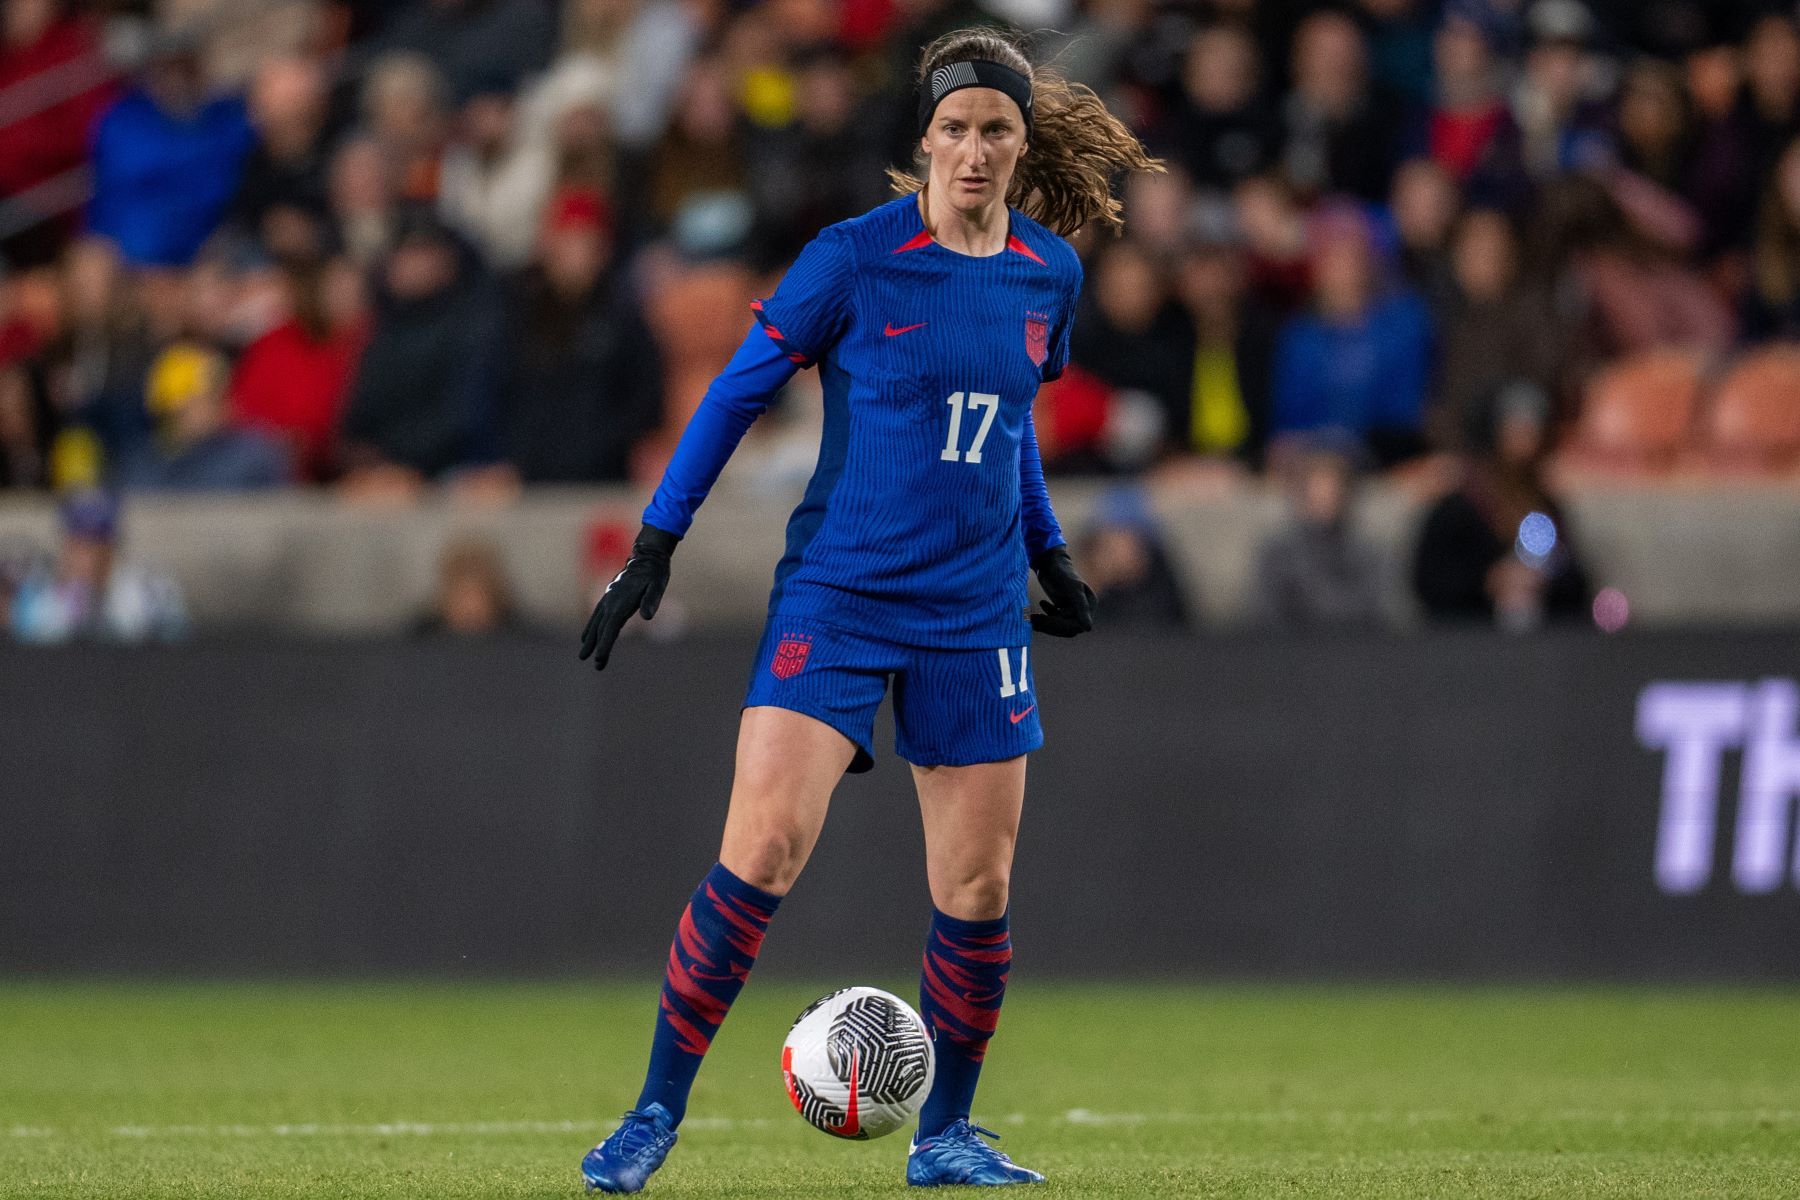 Washington Spirit Midfielder Andi Sullivan Added to U.S. Women’s National Team Roster as a Training Player Ahead of June Matches 